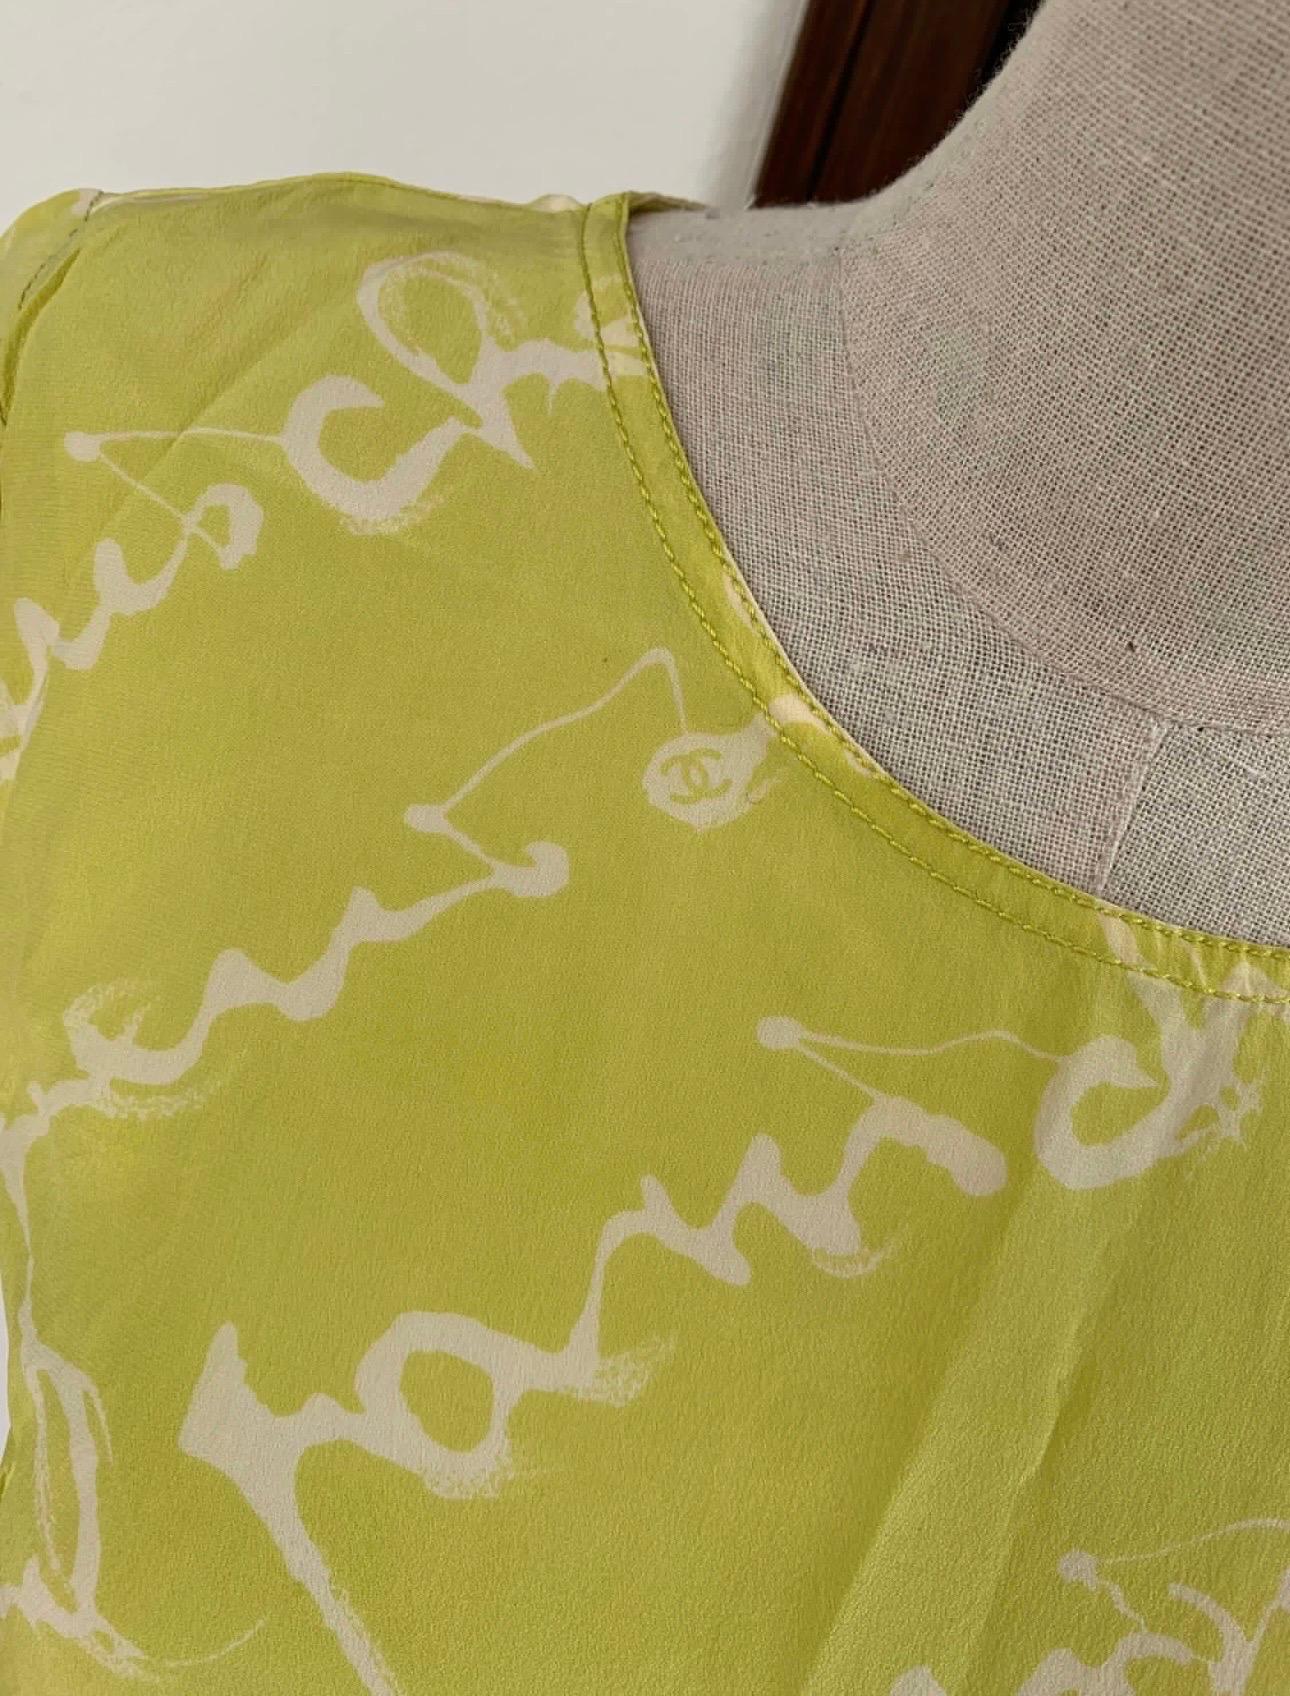 RARE Vintage 90s CHANEL CC Logo Monogram Lime Green White Graffiti Short Sleeve In Excellent Condition For Sale In Malibu, CA